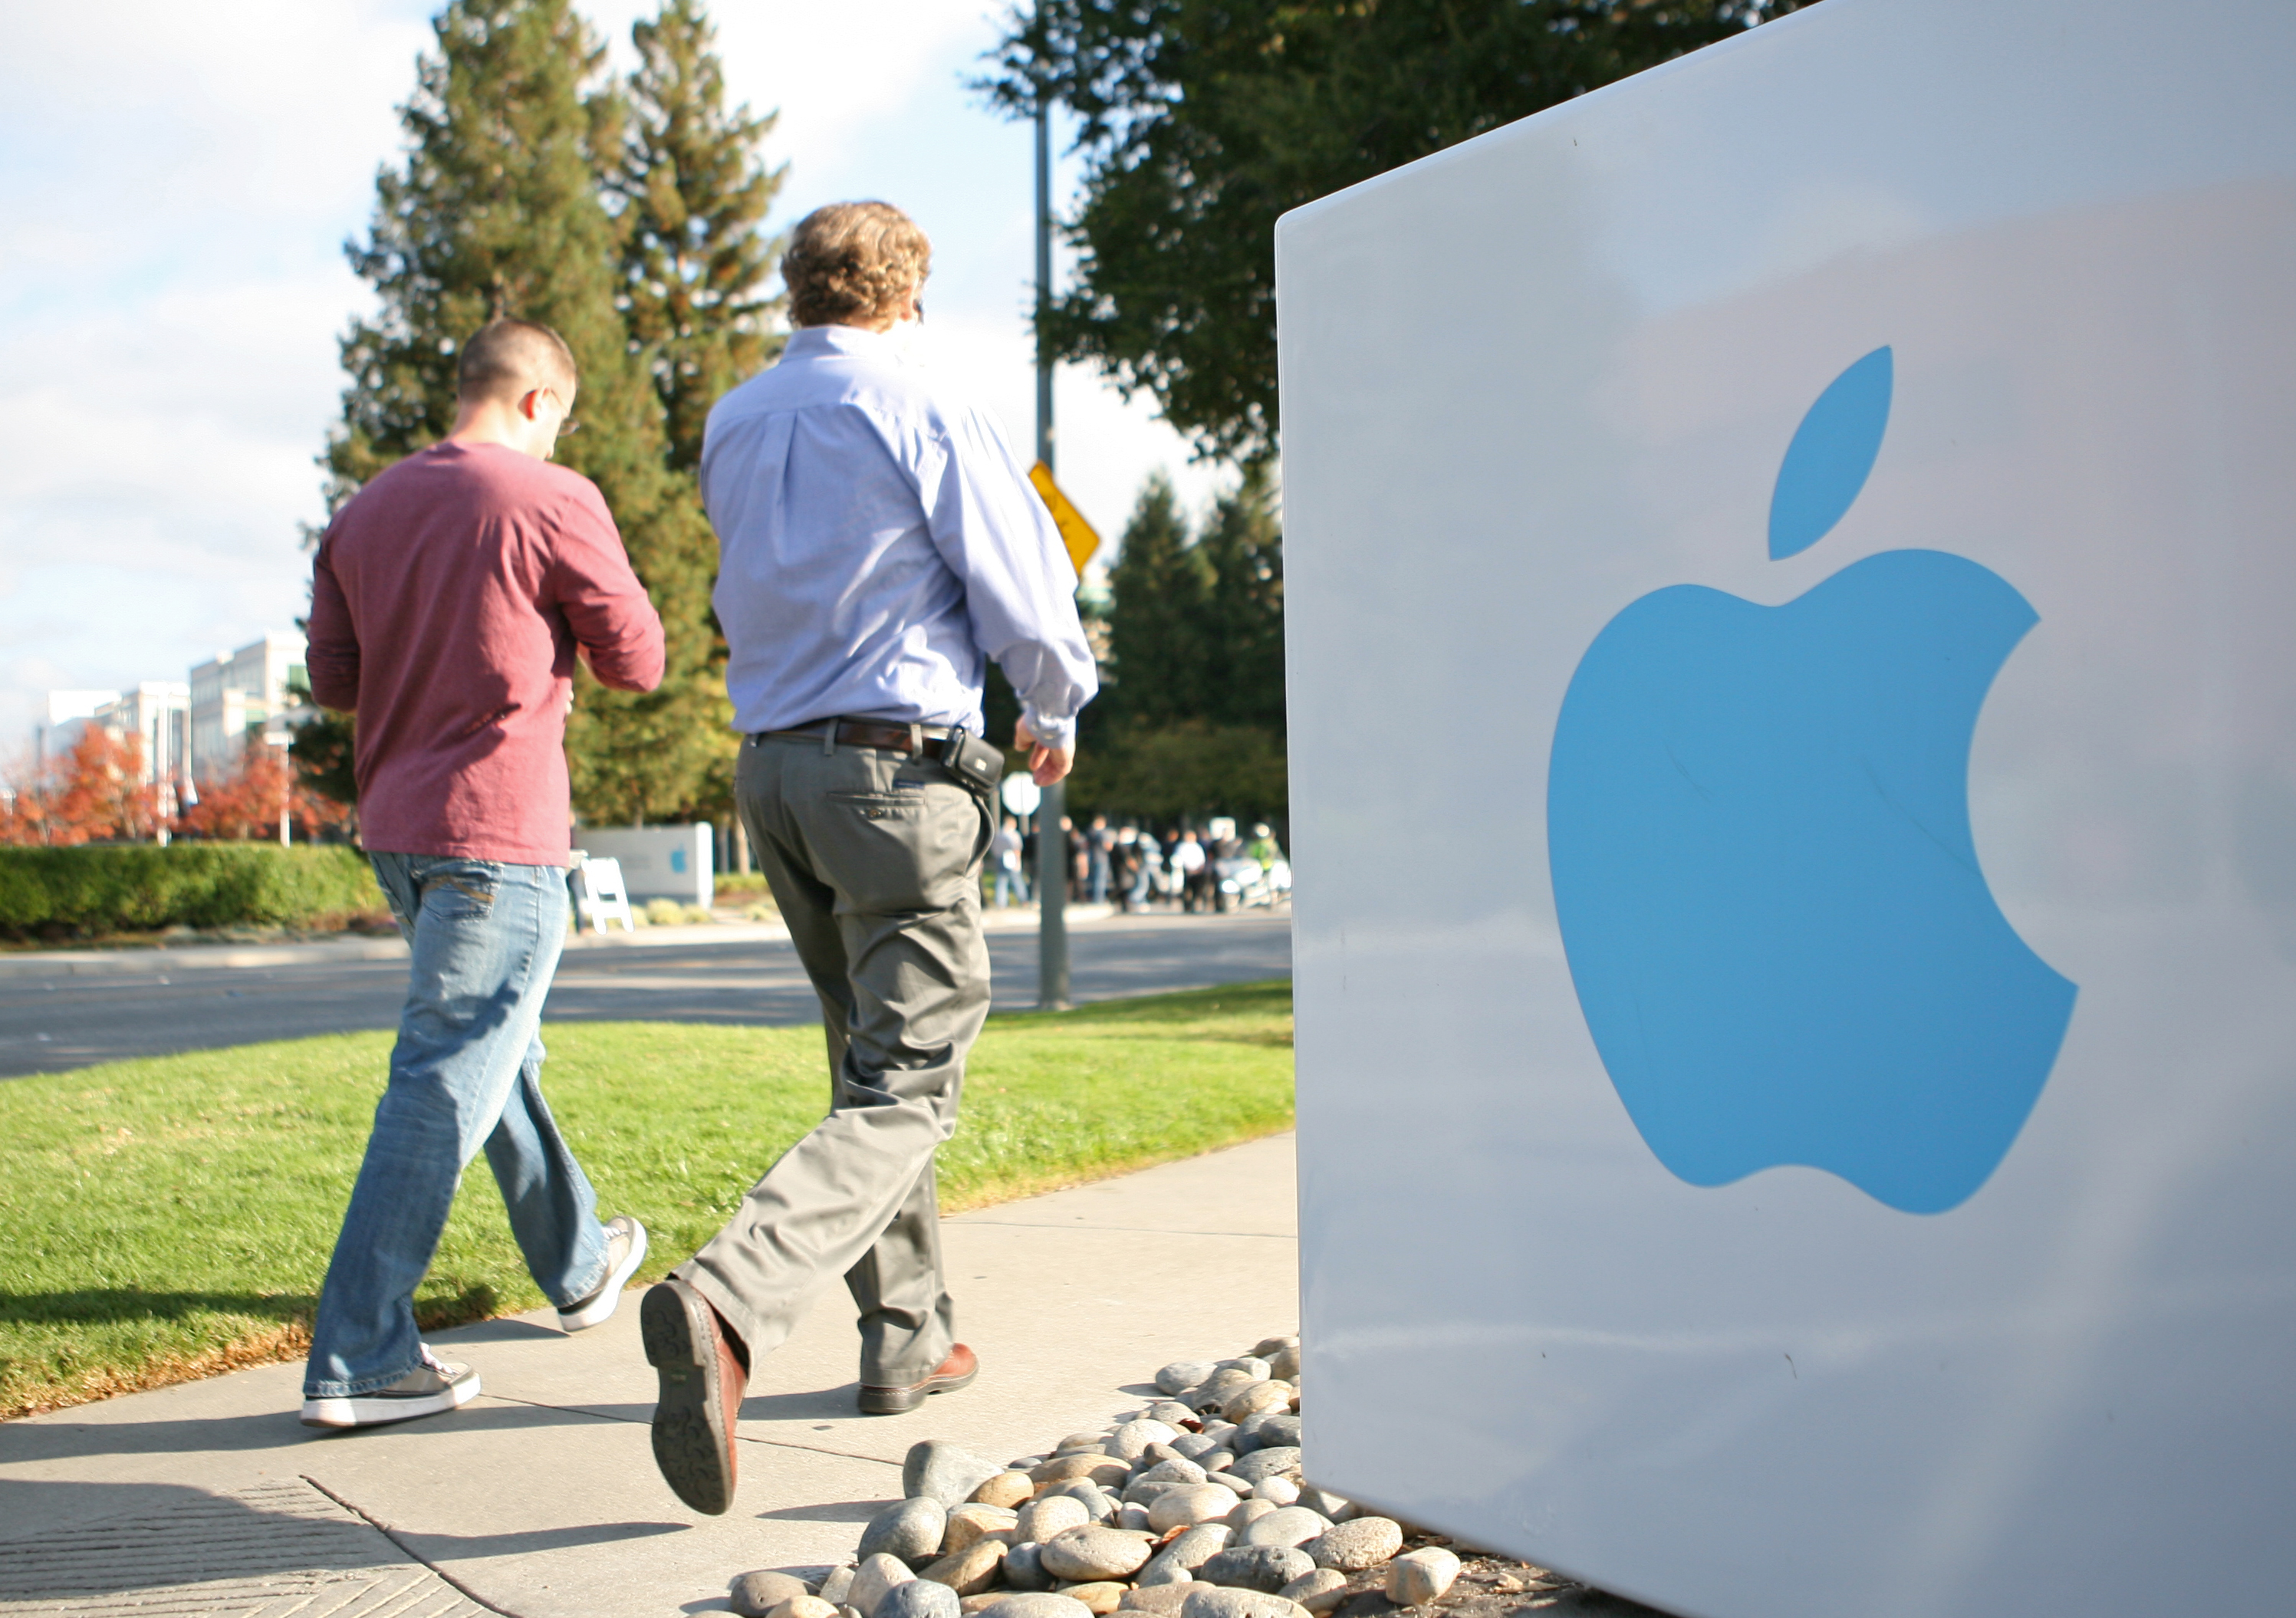 Two people are walking past a large sign with a blue Apple logo, set against a sunny outdoor background with trees.